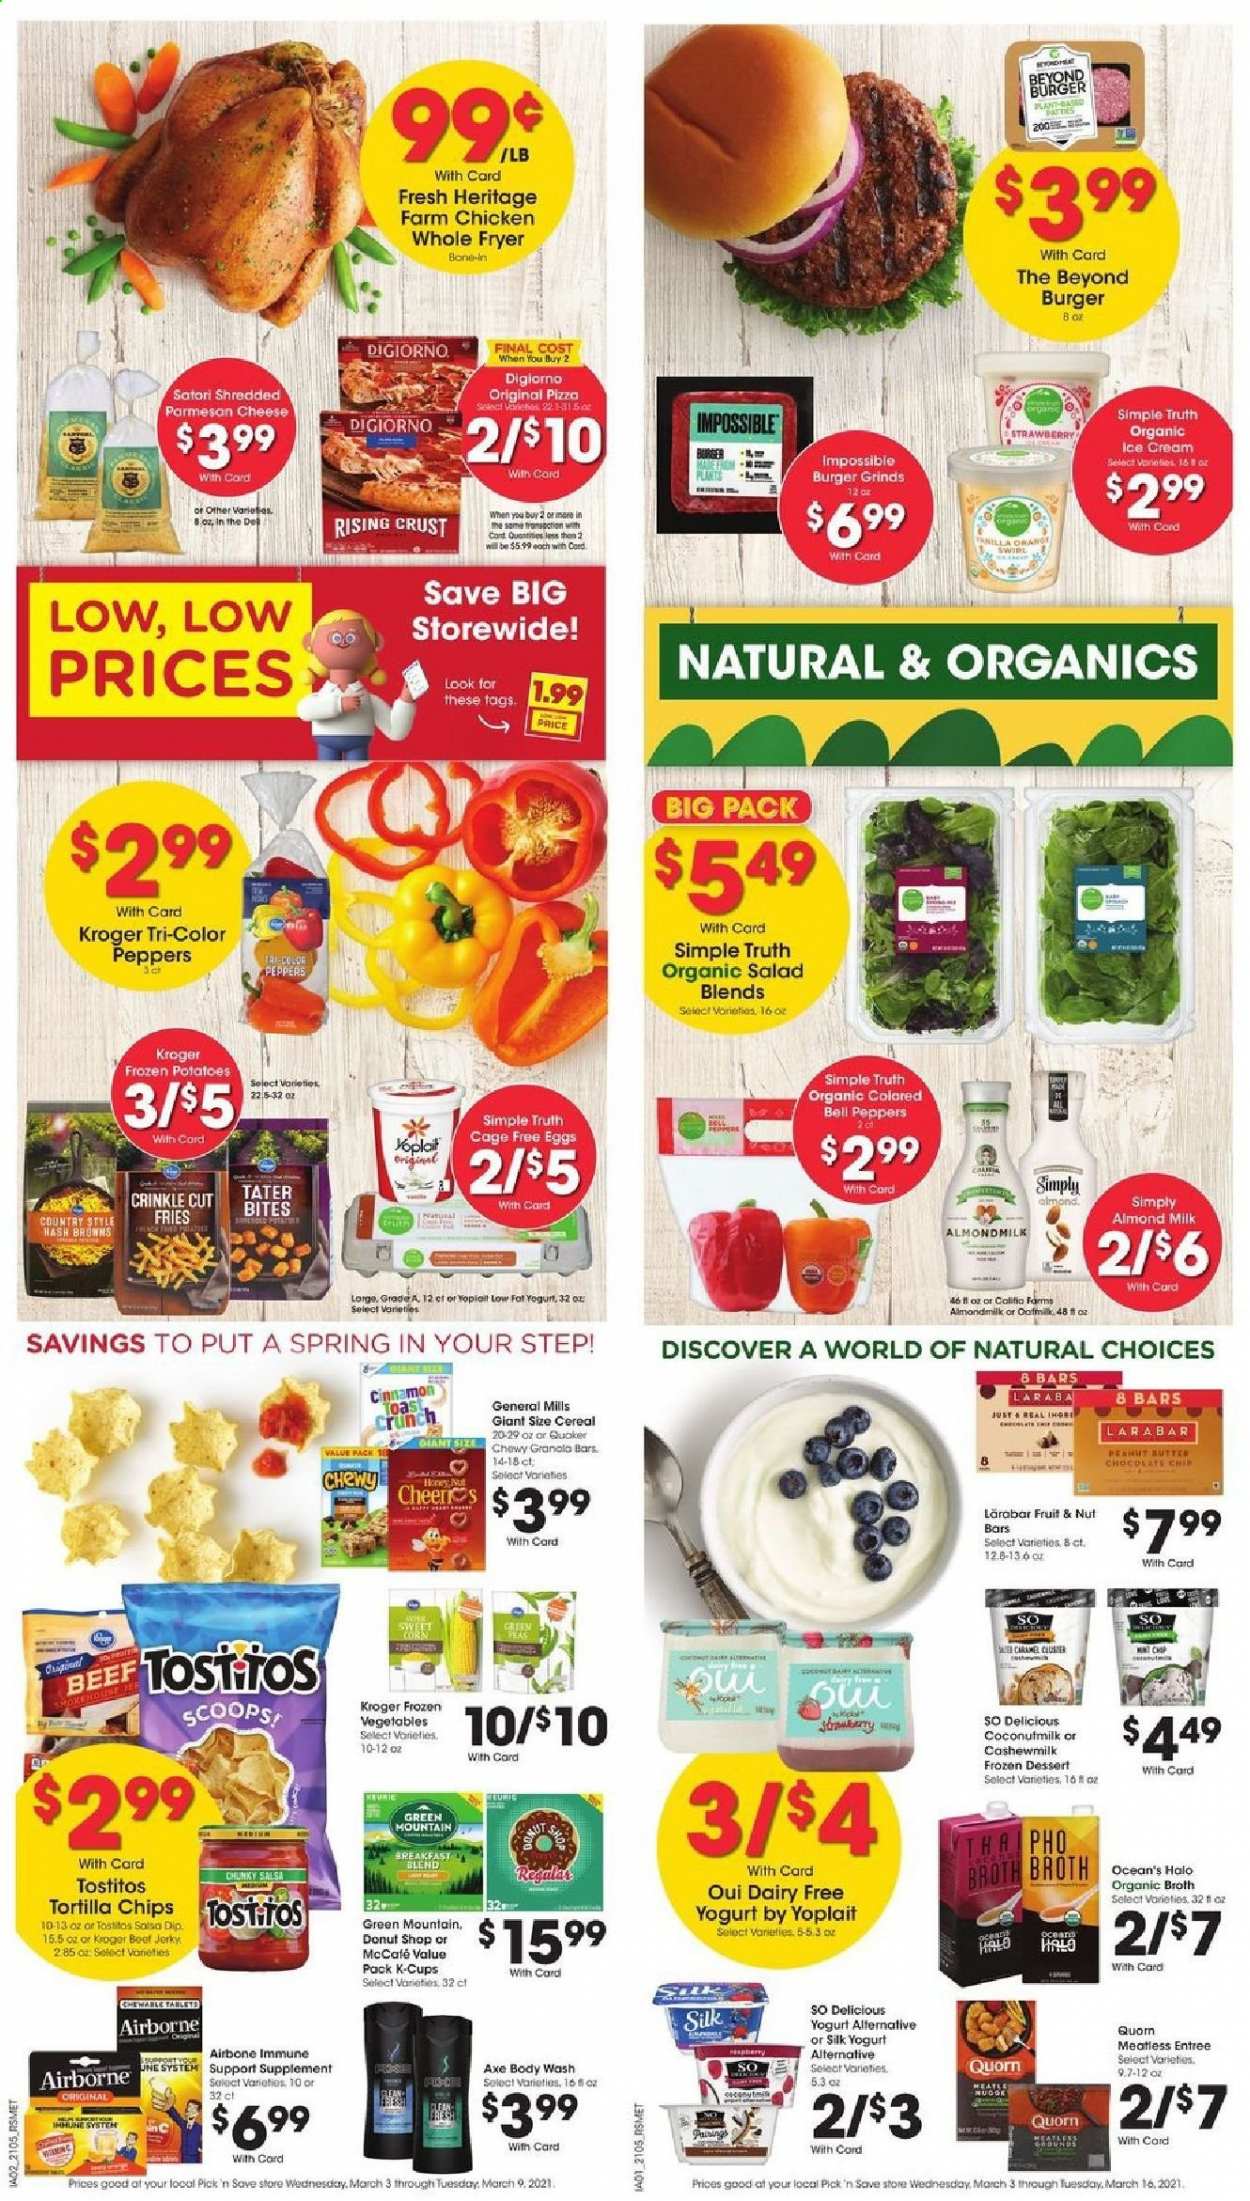 thumbnail - Pick ‘n Save Flyer - 03/03/2021 - 03/09/2021 - Sales products - toast bread, oranges, hash browns, pizza, hamburger, salad, beef jerky, jerky, parmesan, cheese, yoghurt, Yoplait, almond milk, Silk, eggs, cage free eggs, salsa, dip, ice cream, corn, frozen vegetables, bell peppers, sweet corn, potato fries, tortilla chips, Tostitos, broth, coconut milk, cereals, nut bar, cinnamon, caramel, peanuts, coffee capsules, K-Cups, breakfast blend, Green Mountain, body wash, deep fryer, Airbone. Page 6.